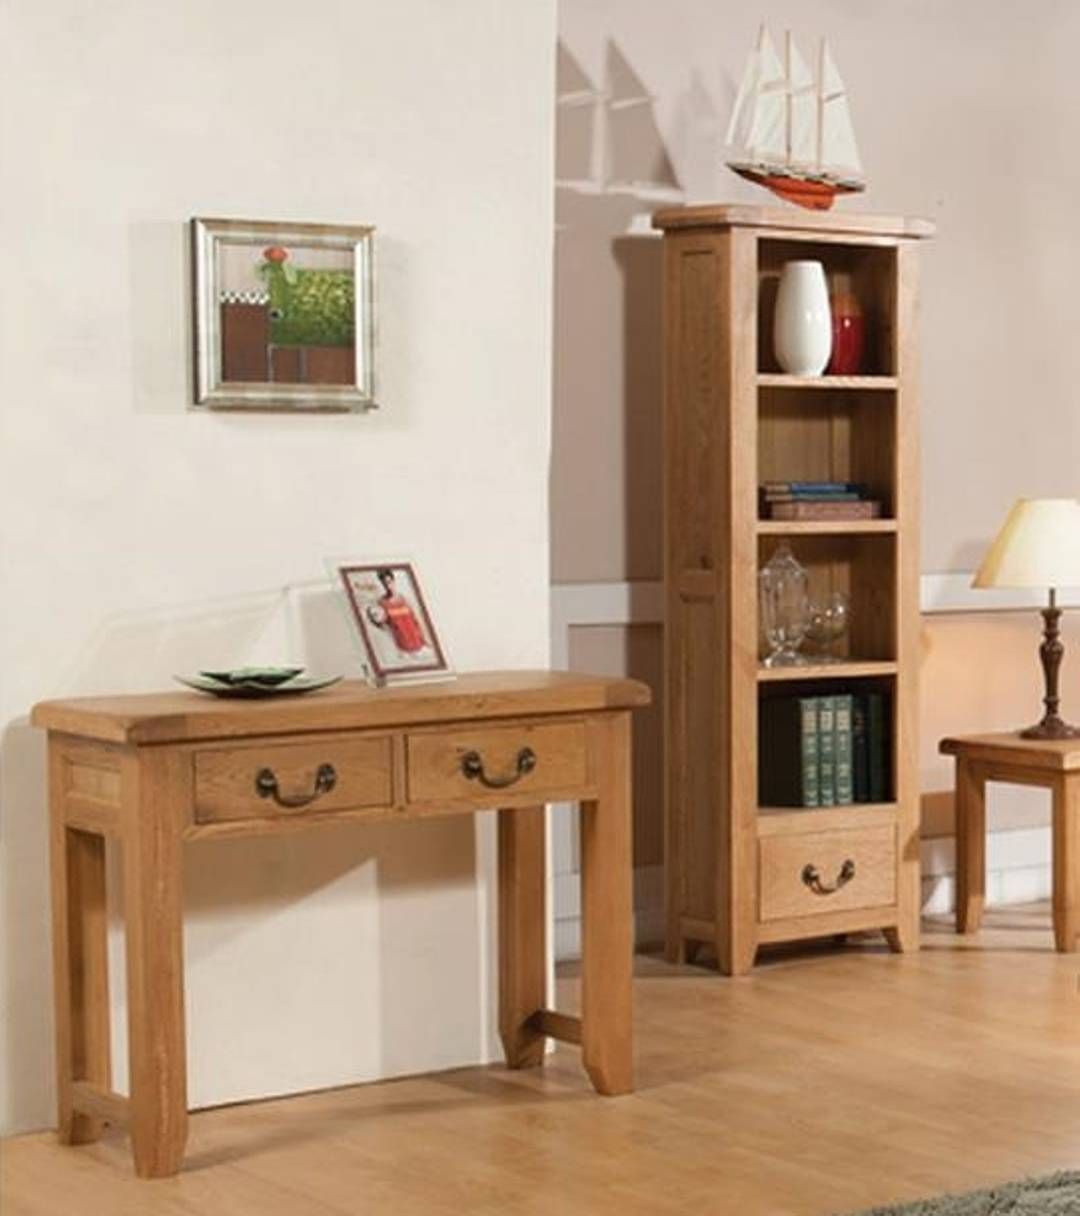 Console Tables And Open Fronted Bookcases Can Take Care Of A Lot Of Intended For Open Storage Console Tables (View 3 of 20)